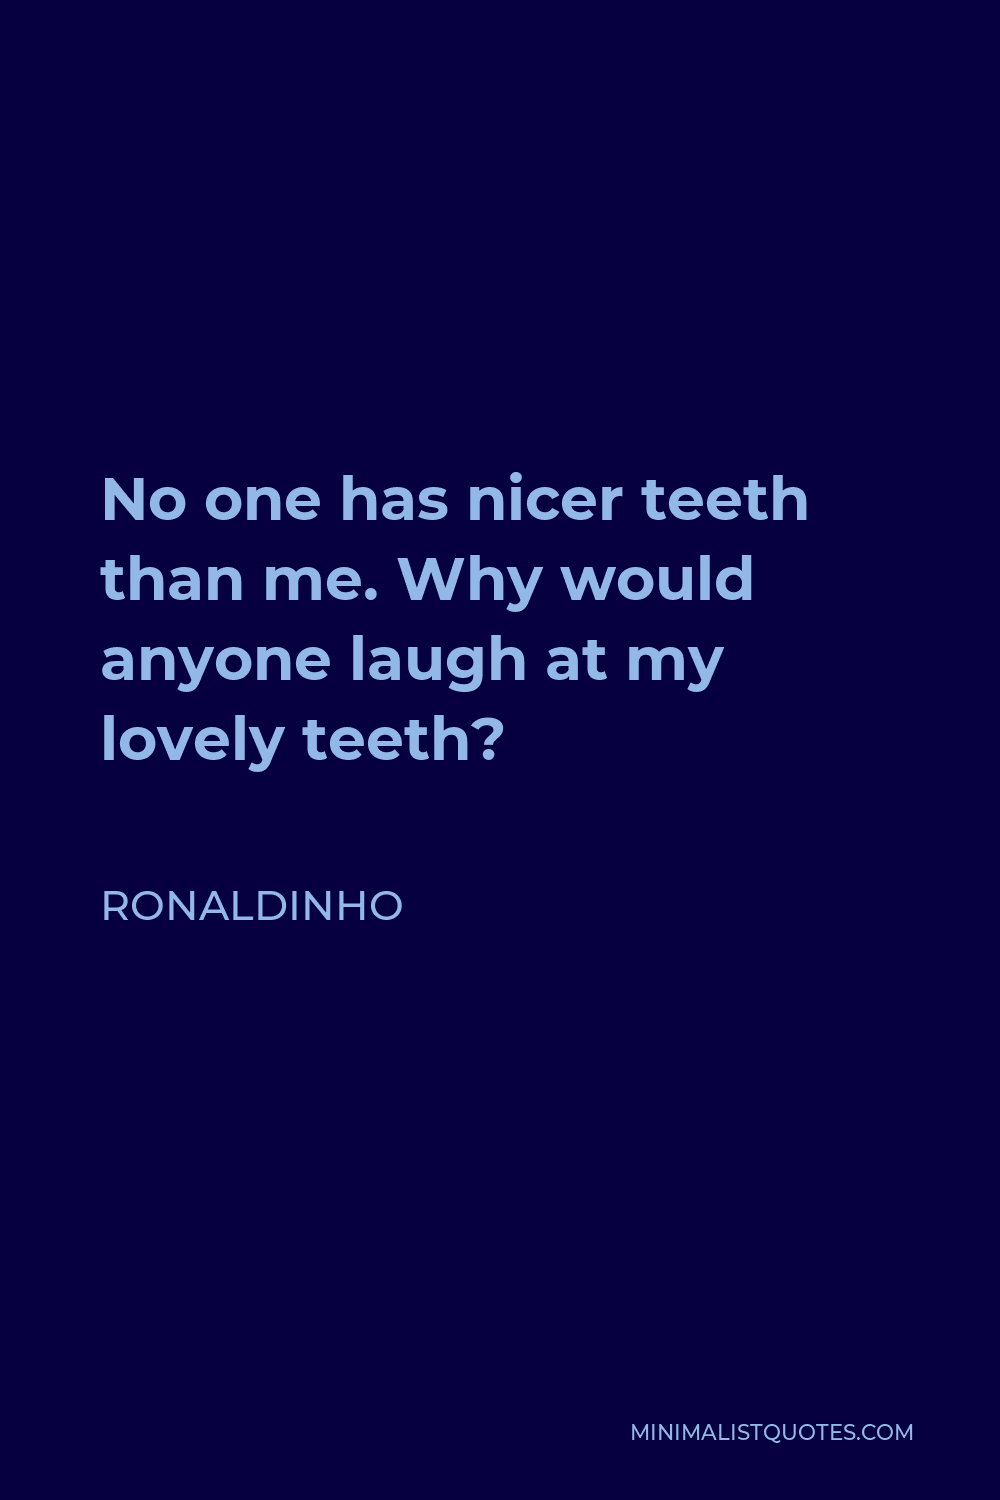 Ronaldinho Quote - No one has nicer teeth than me. Why would anyone laugh at my lovely teeth?